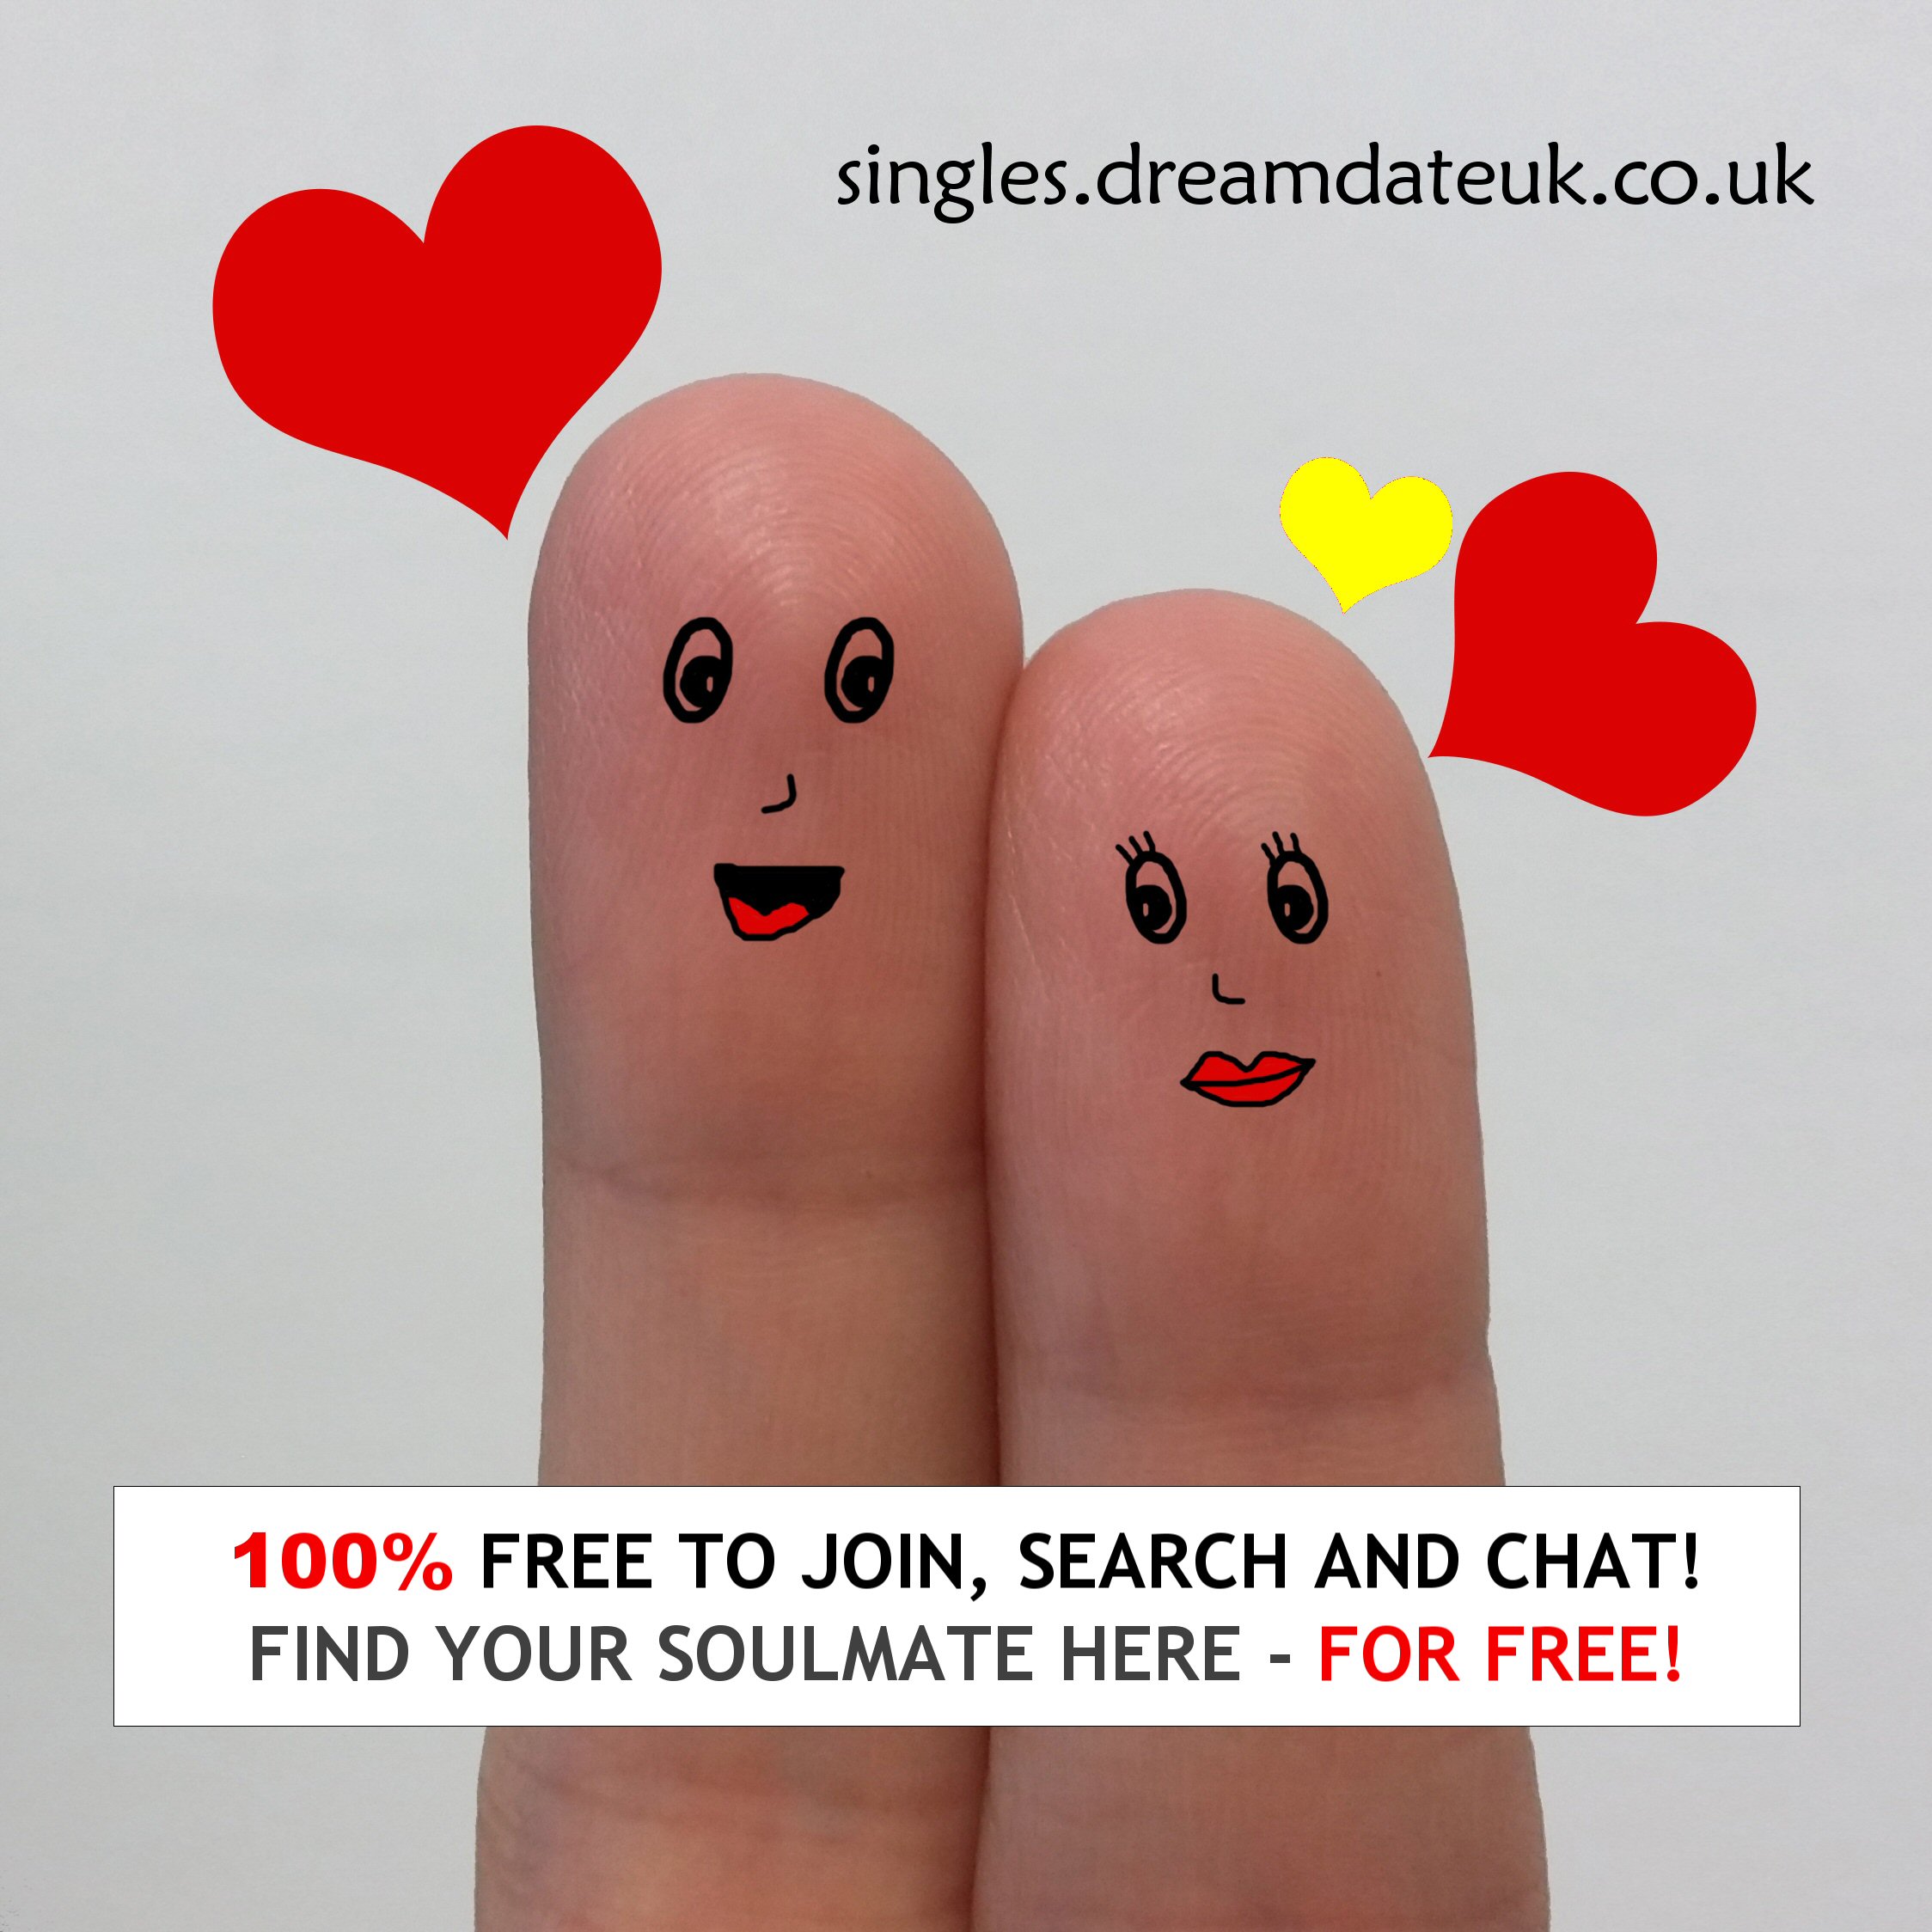 Free singles dating in the UK